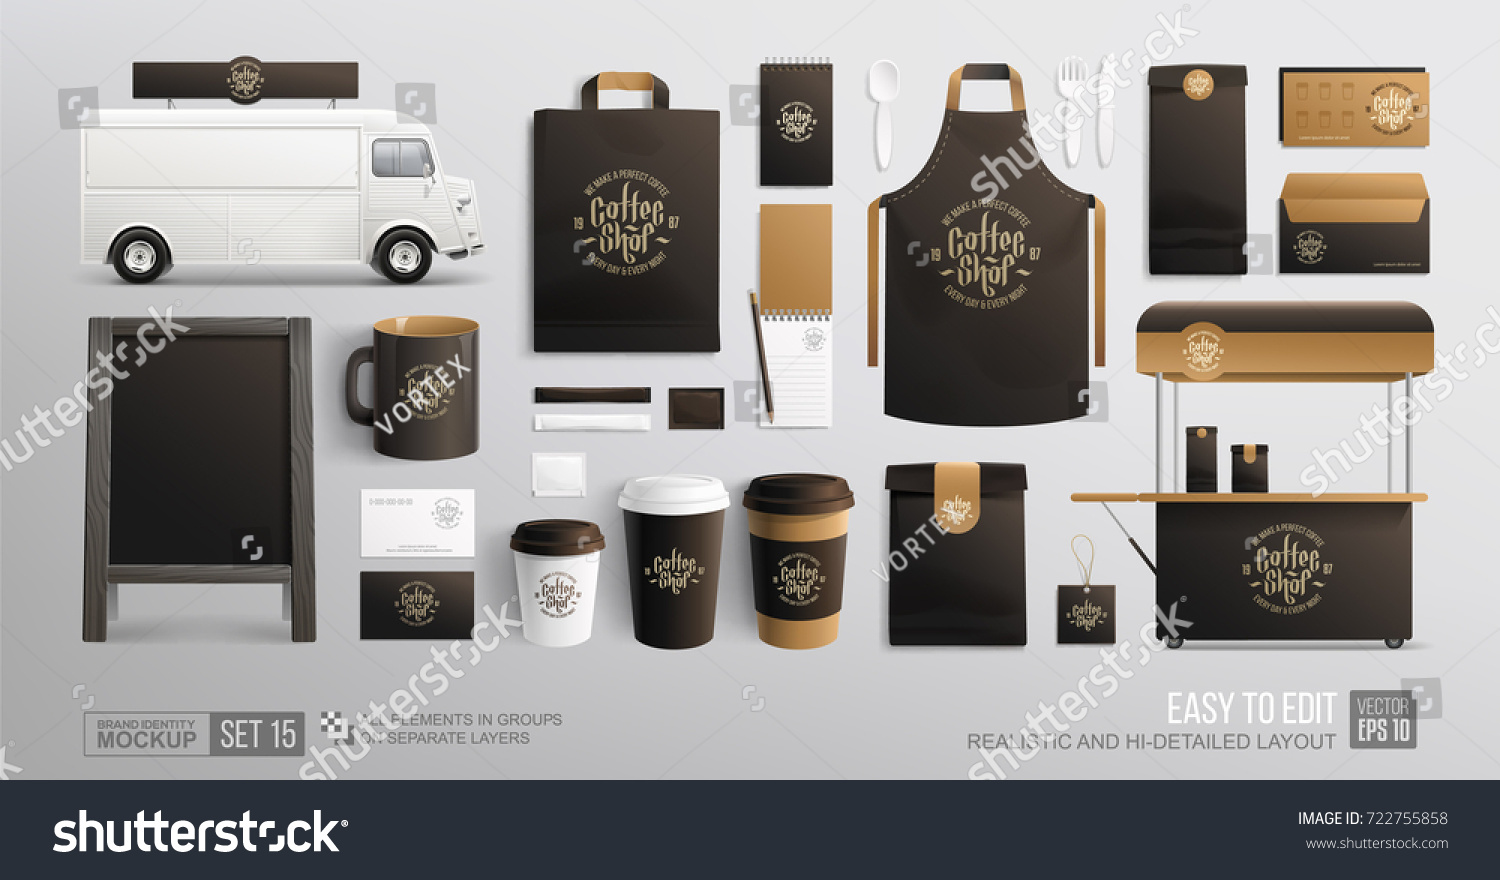 Download Coffee Cafe Food Cart Branding Corporate 스톡 벡터 722755858 - Shutterstock